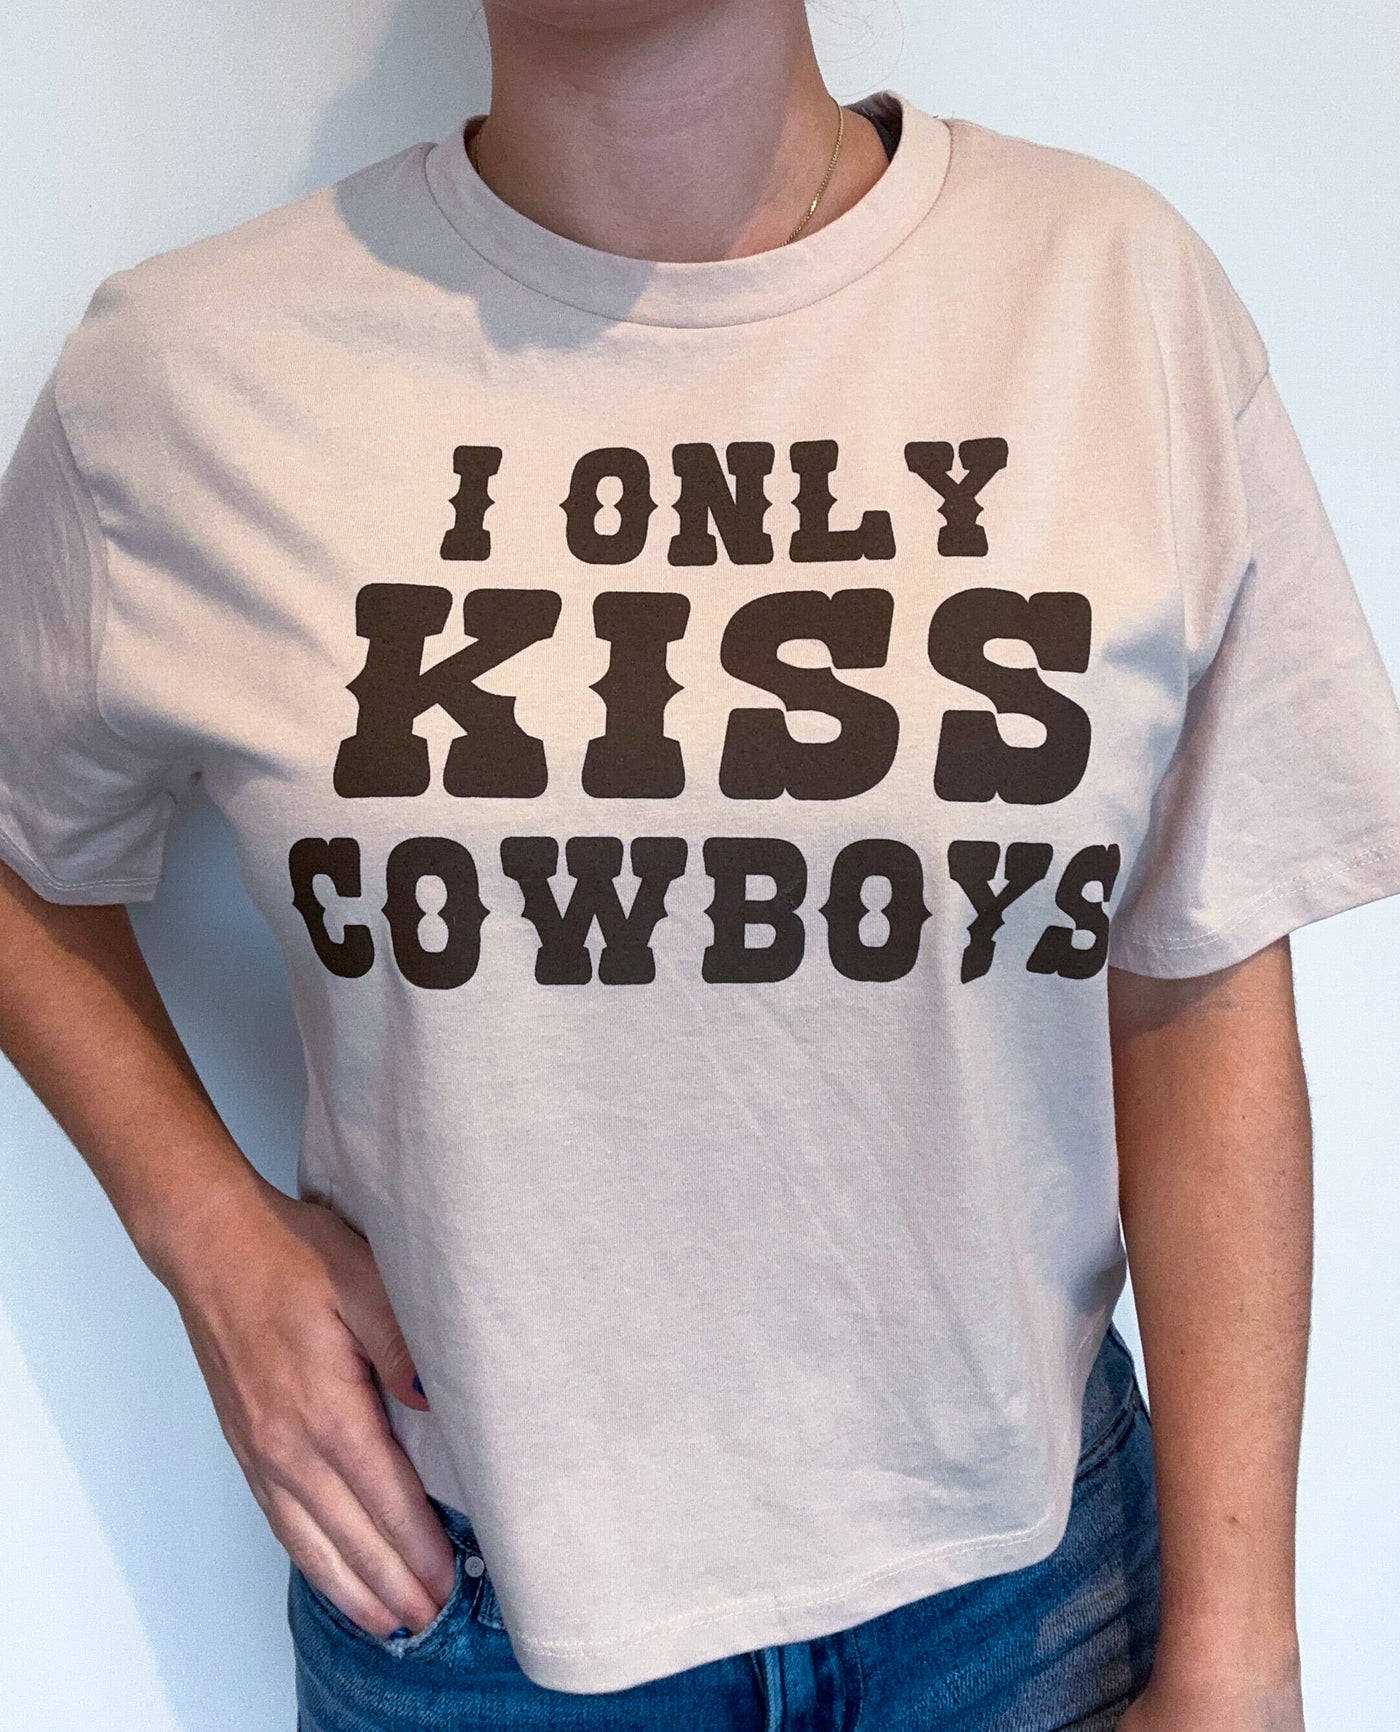 I Only Kiss Cowboys Graphic Tee-100 - TOPS - SHORT SLEEVE/SLEEVELESS-ORGANIC GENERATION-[option4]-[option5]-[option6]-Leather & Lace Boutique Shop